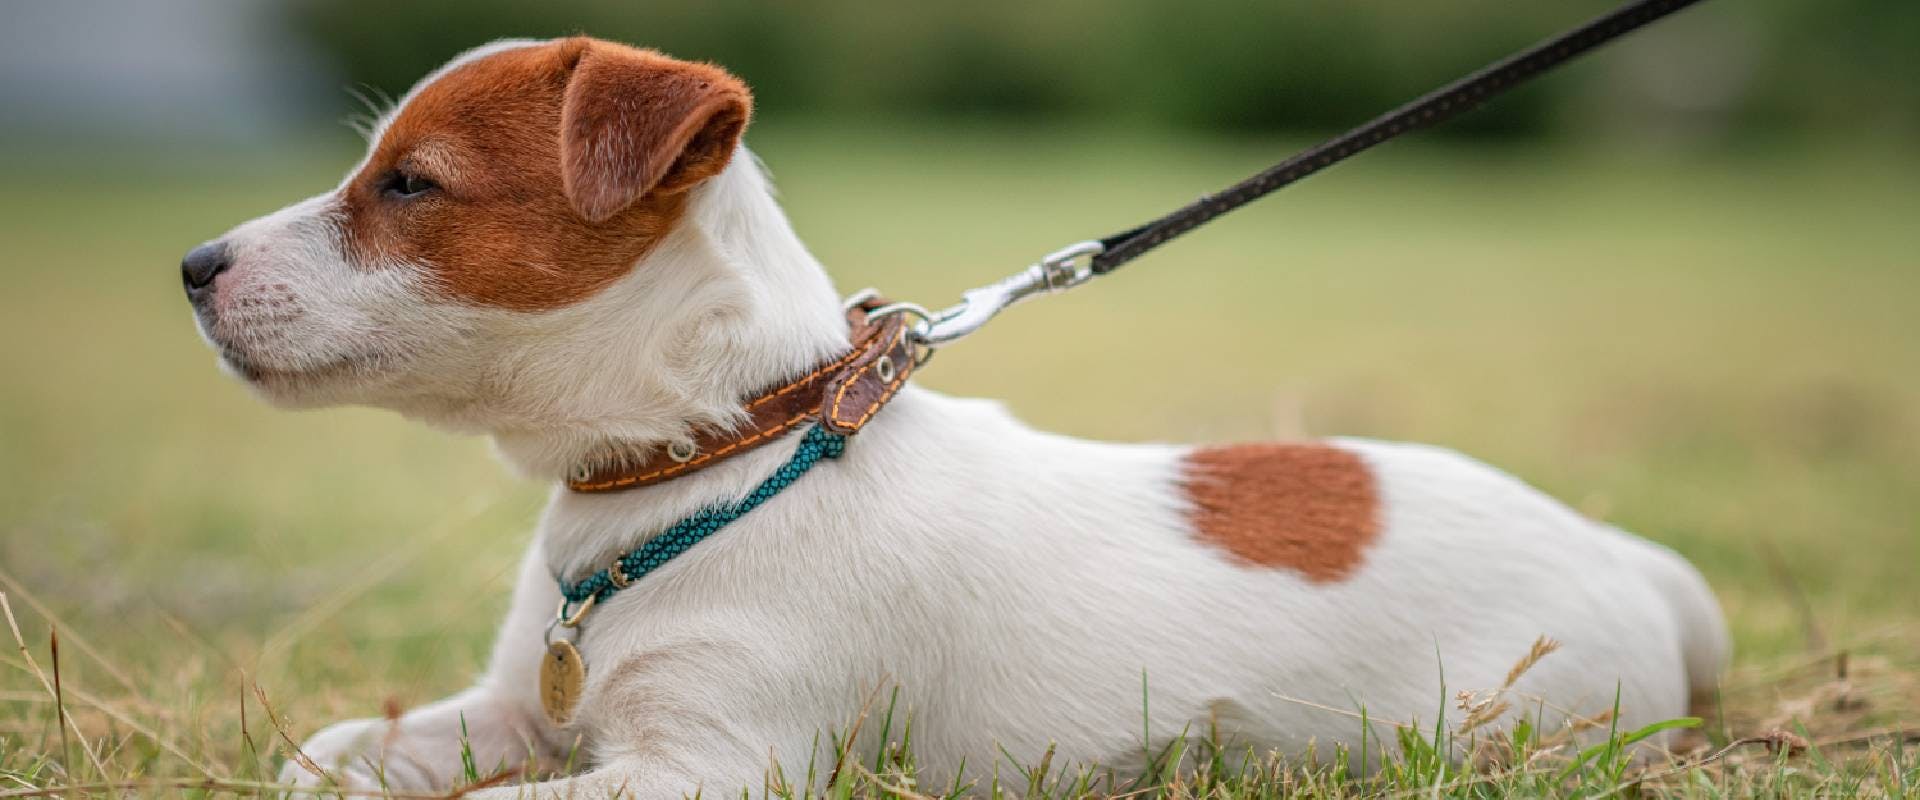 Jack Russell Terrier puppy on a leash